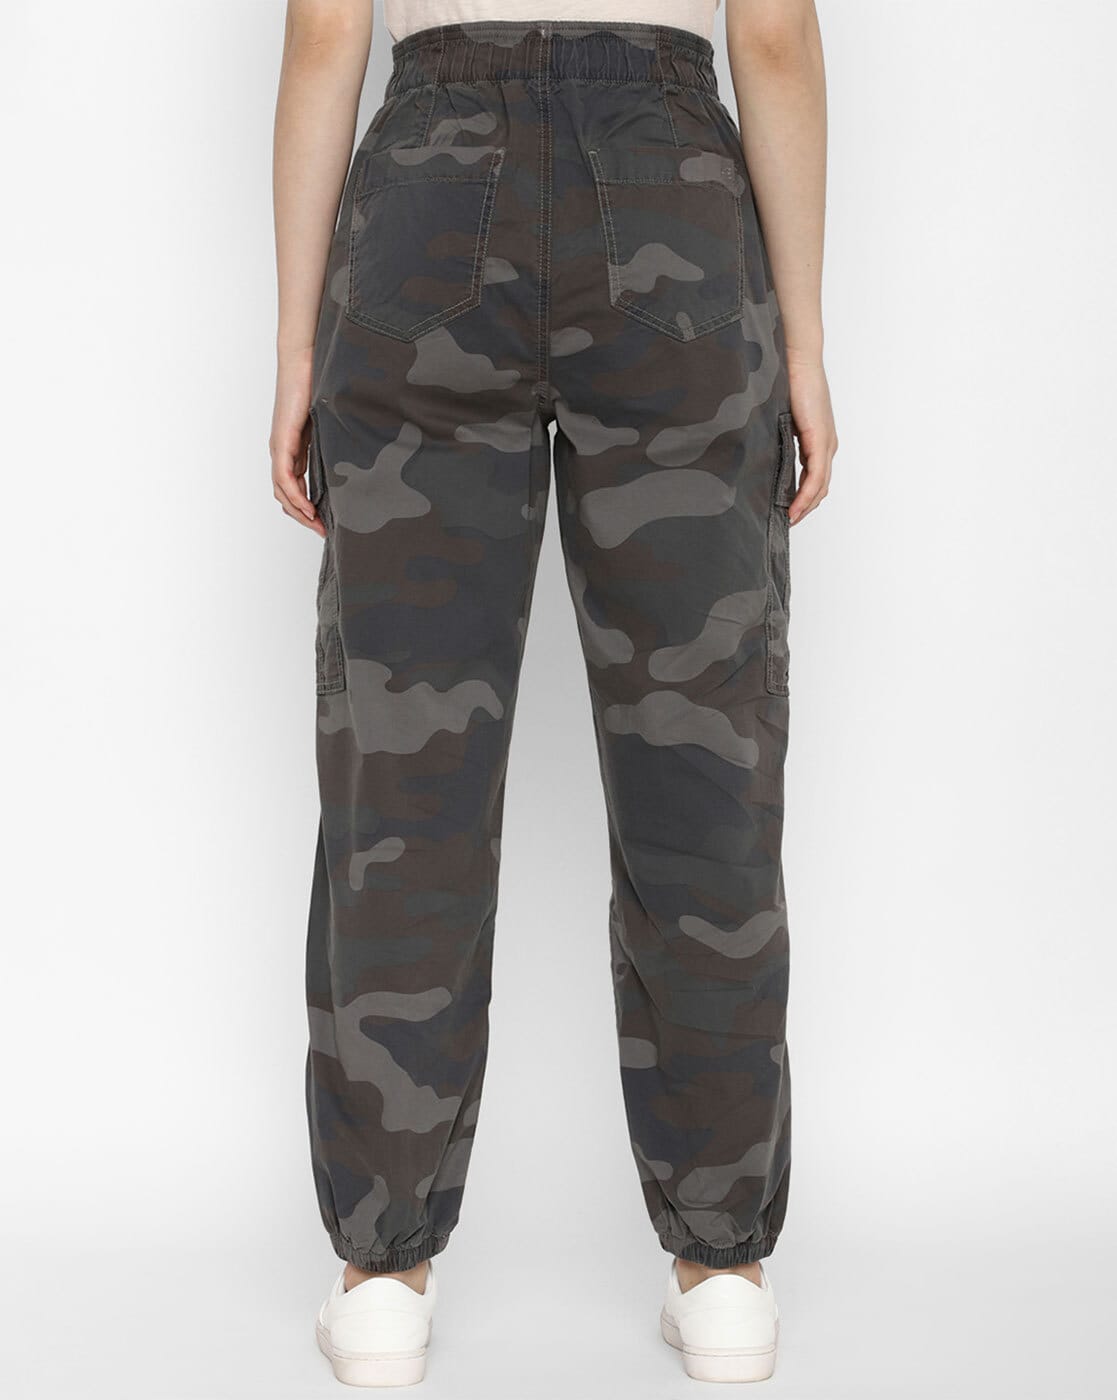 American Eagle Men Flex Slim fit Camo Cargo Pants Size 30x36 new with tags   eBay